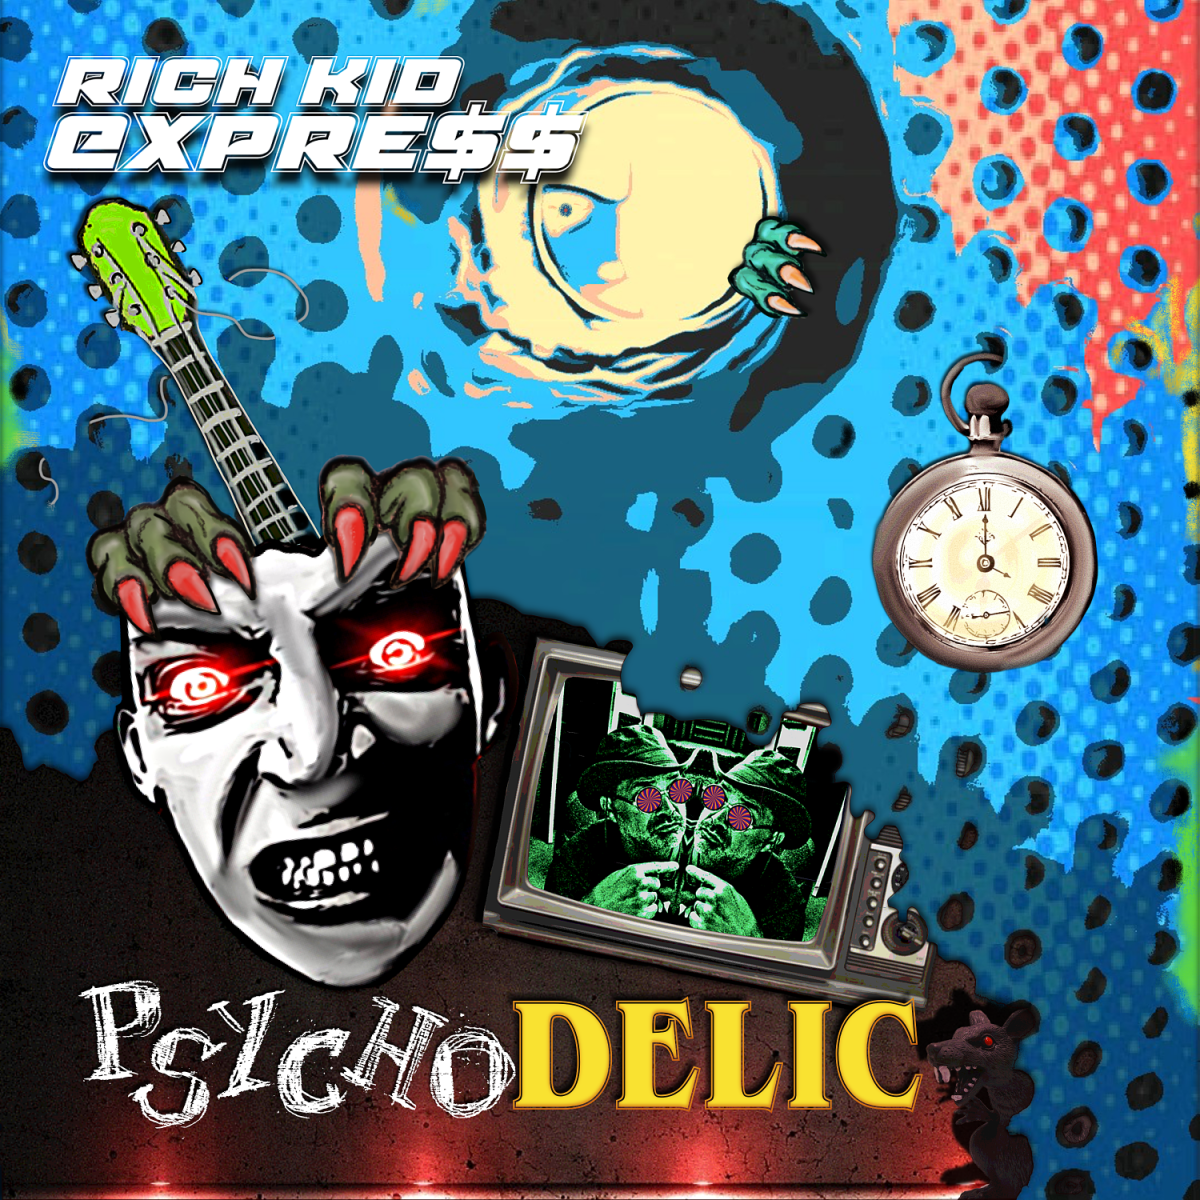 My blog on HubPages.com - Reviews of Music, Movies, etc. - Page 3 Rich-kid-express-psychodelic-review